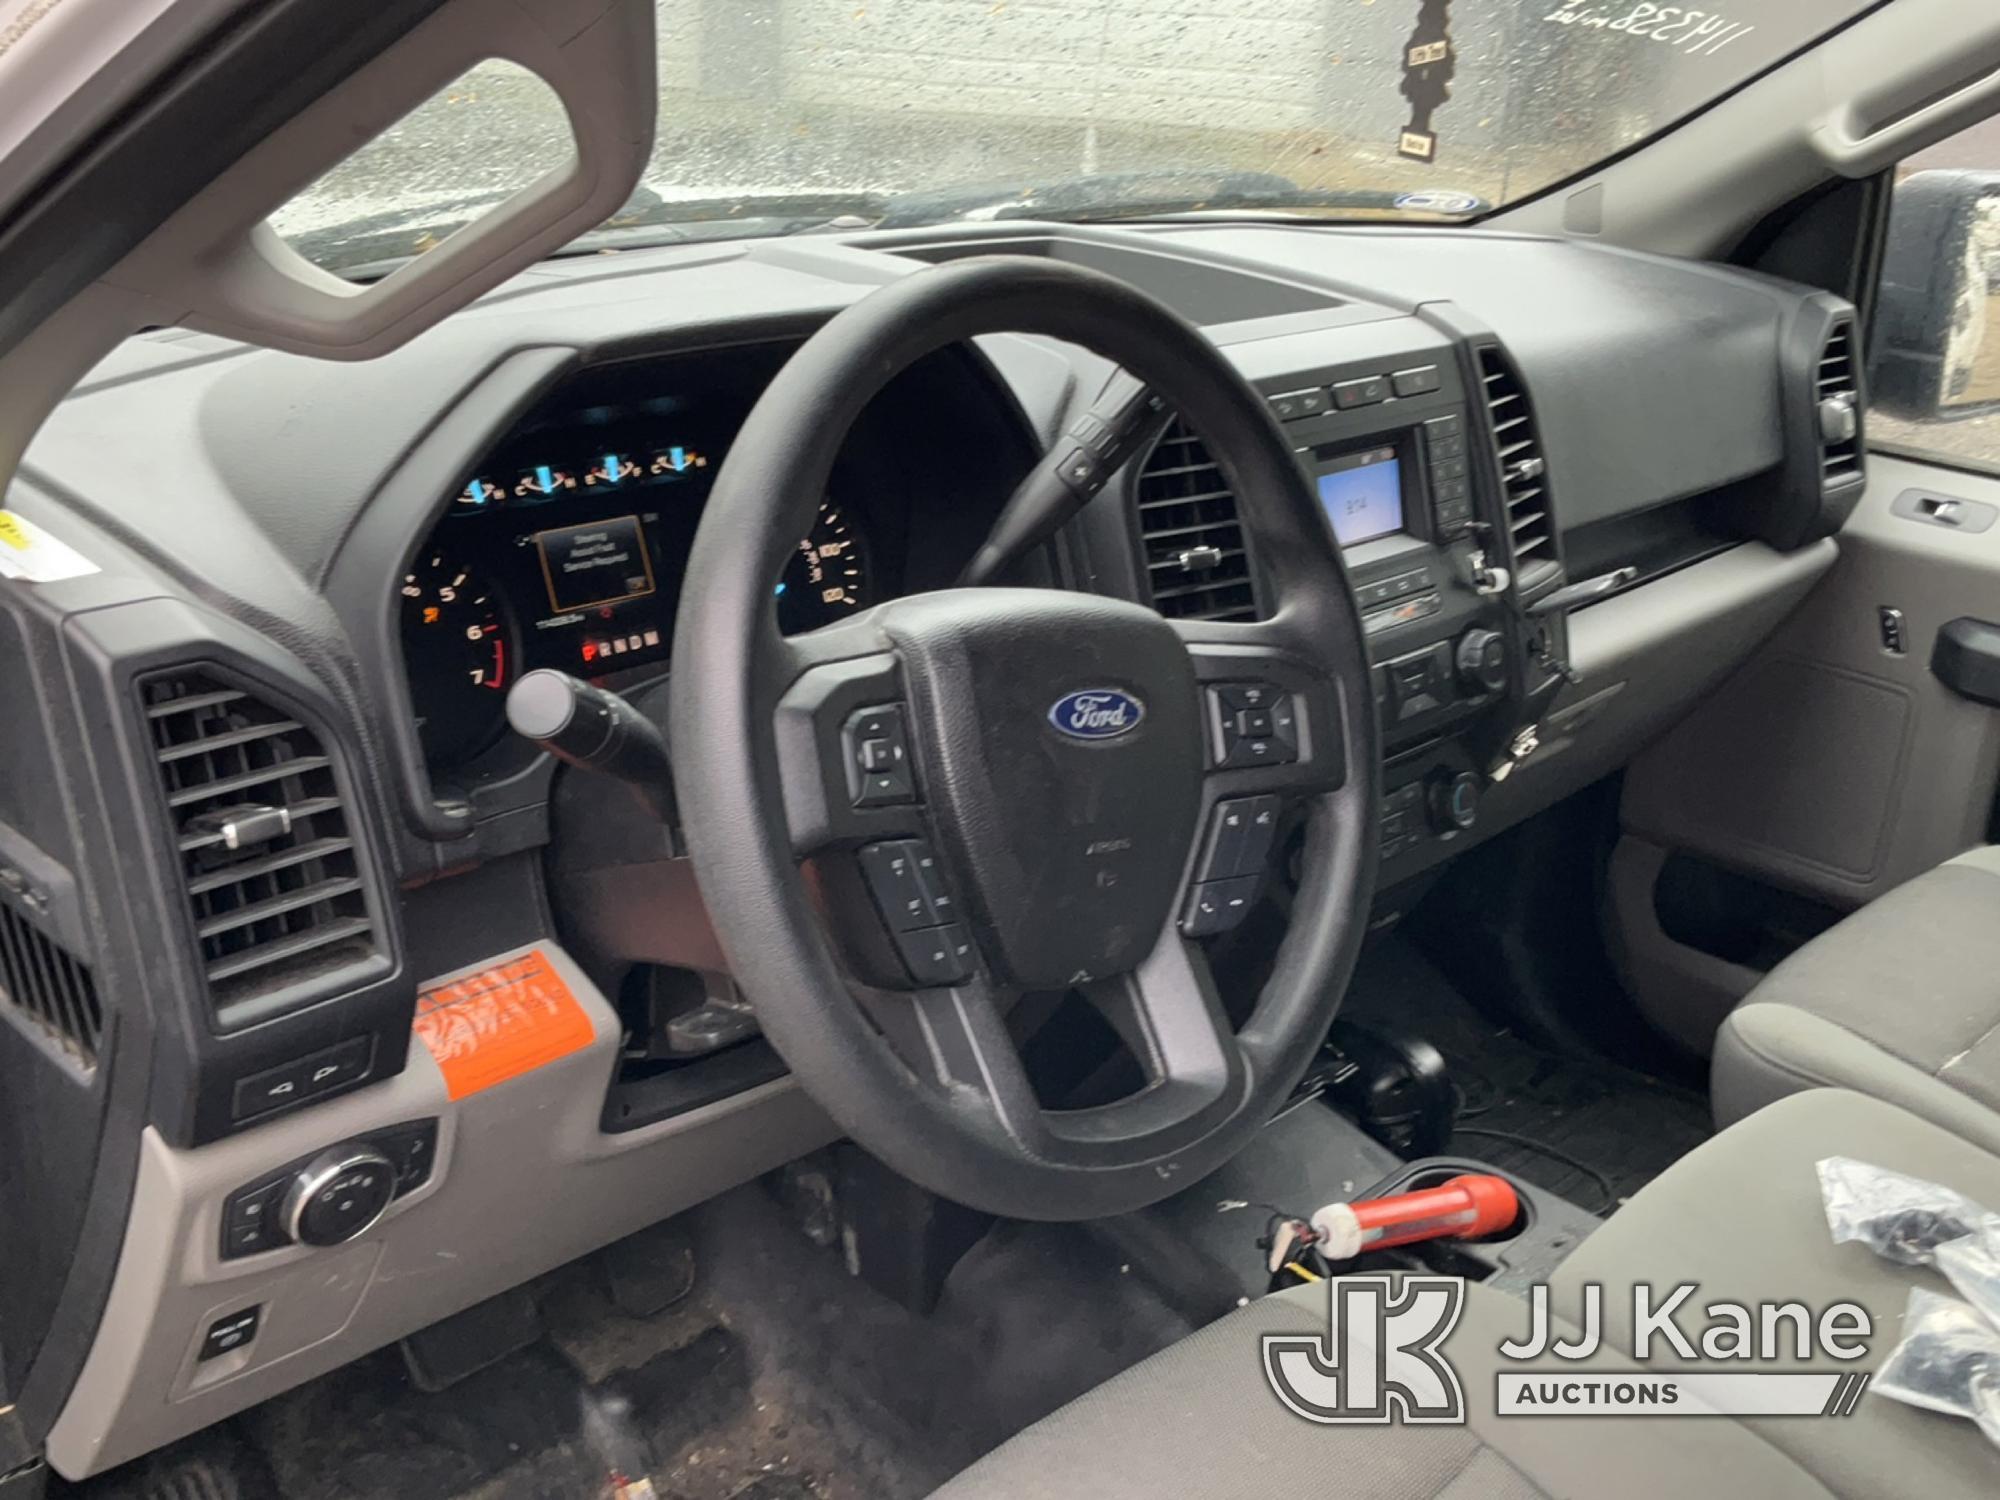 (Charlotte, NC) 2018 Ford F150 4x4 Extended-Cab Pickup Truck Runs & Moves) (Check Engine Light On, A